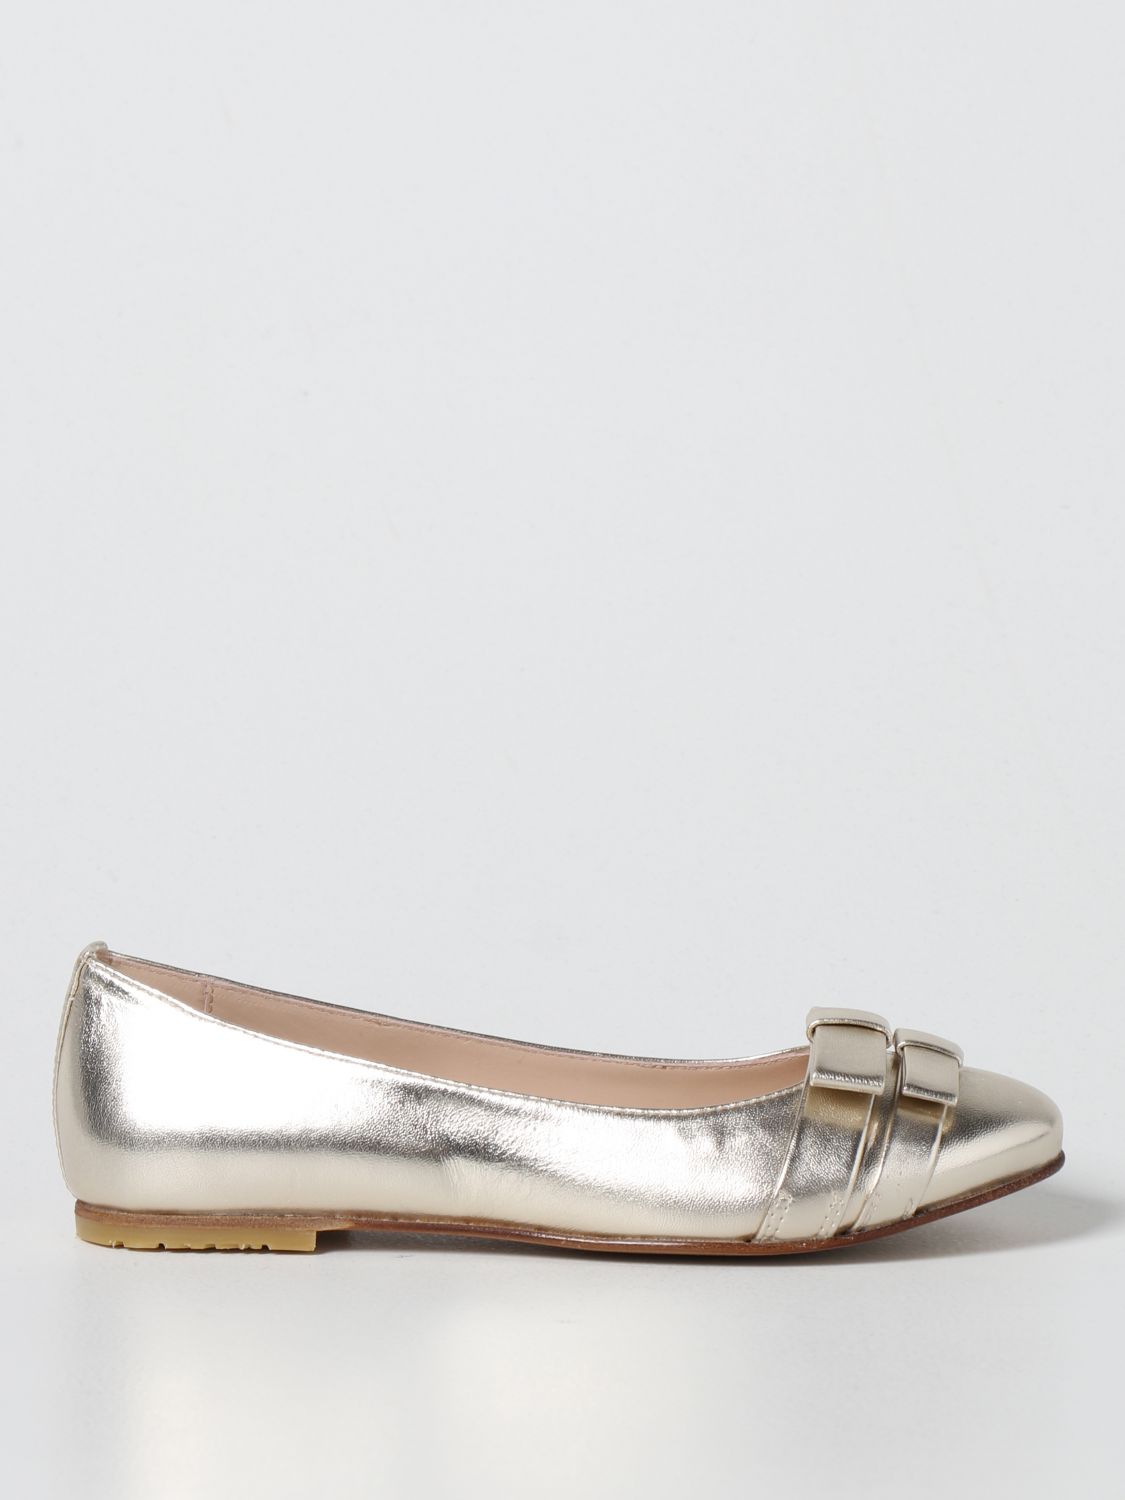 Montelpare Tradition Montelpare Tradition ballerinas in laminated leather